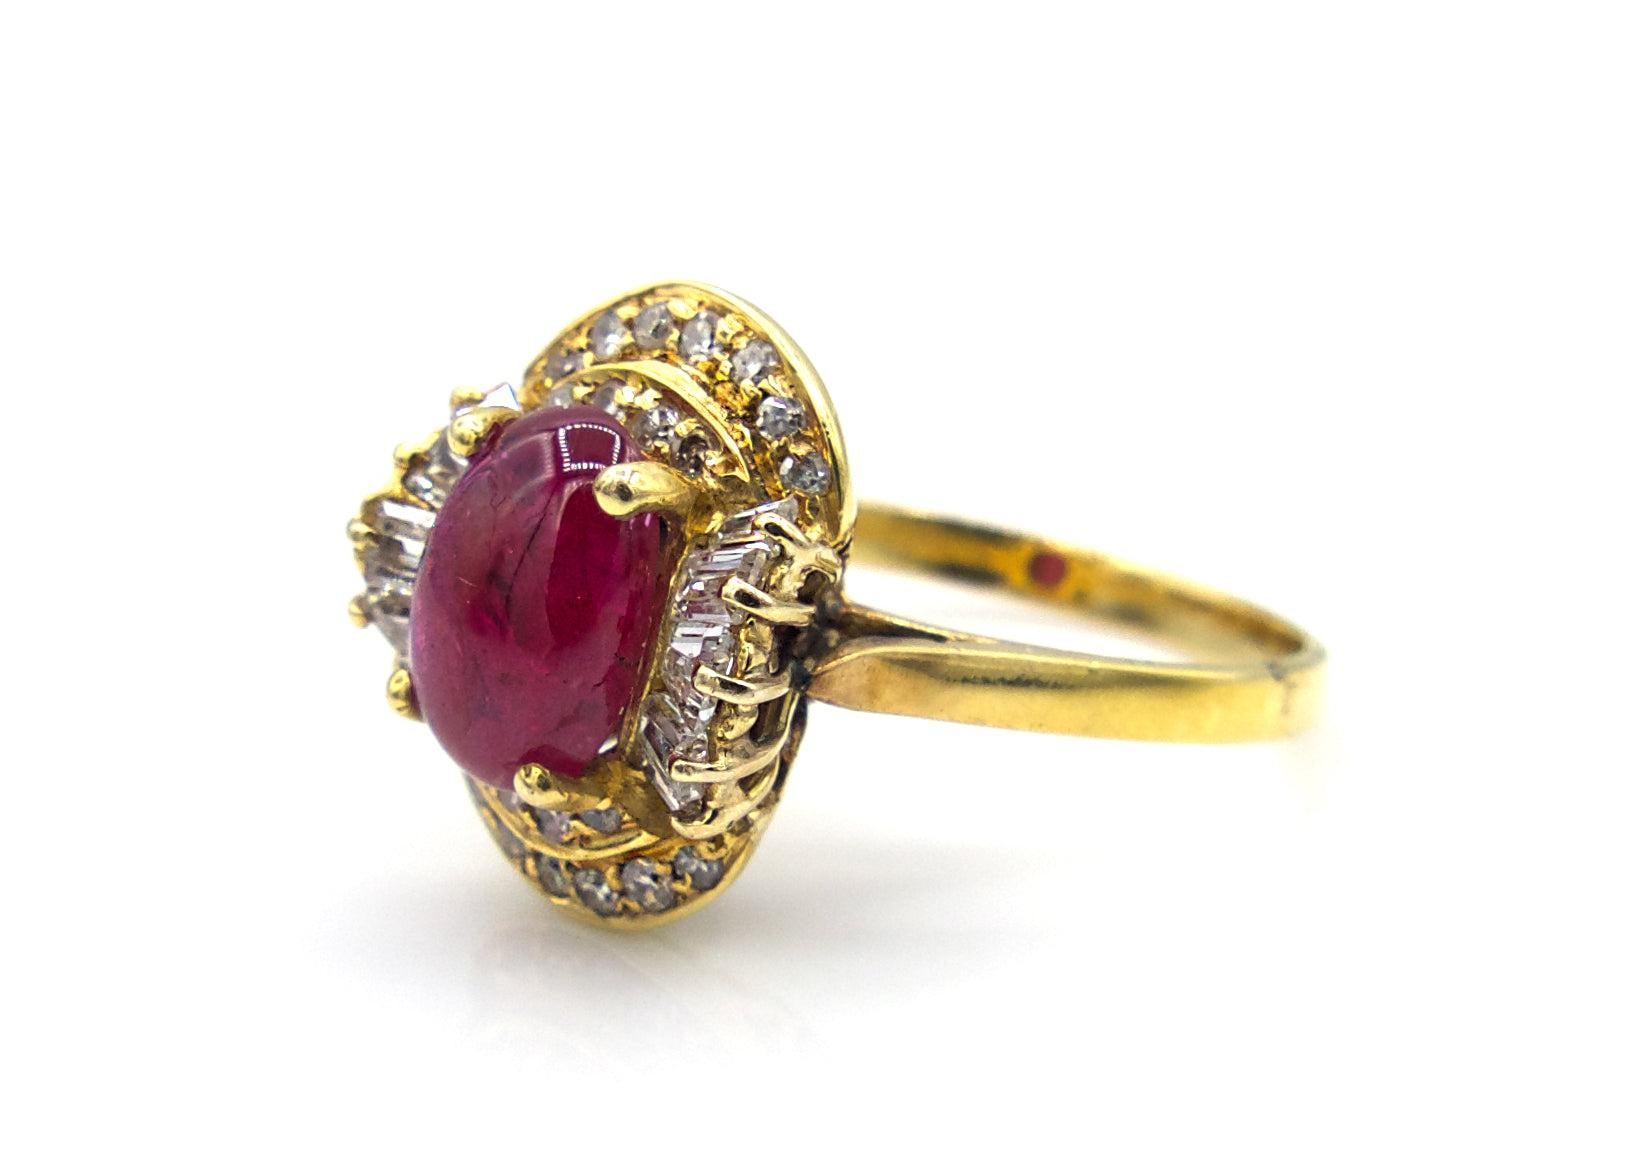 This Cabochon Ruby ring is set in 18K yellow gold with the center stone surrounded by 12 baguette diamonds and 22 round cut diamonds. 

4.5 g

Size 6.25